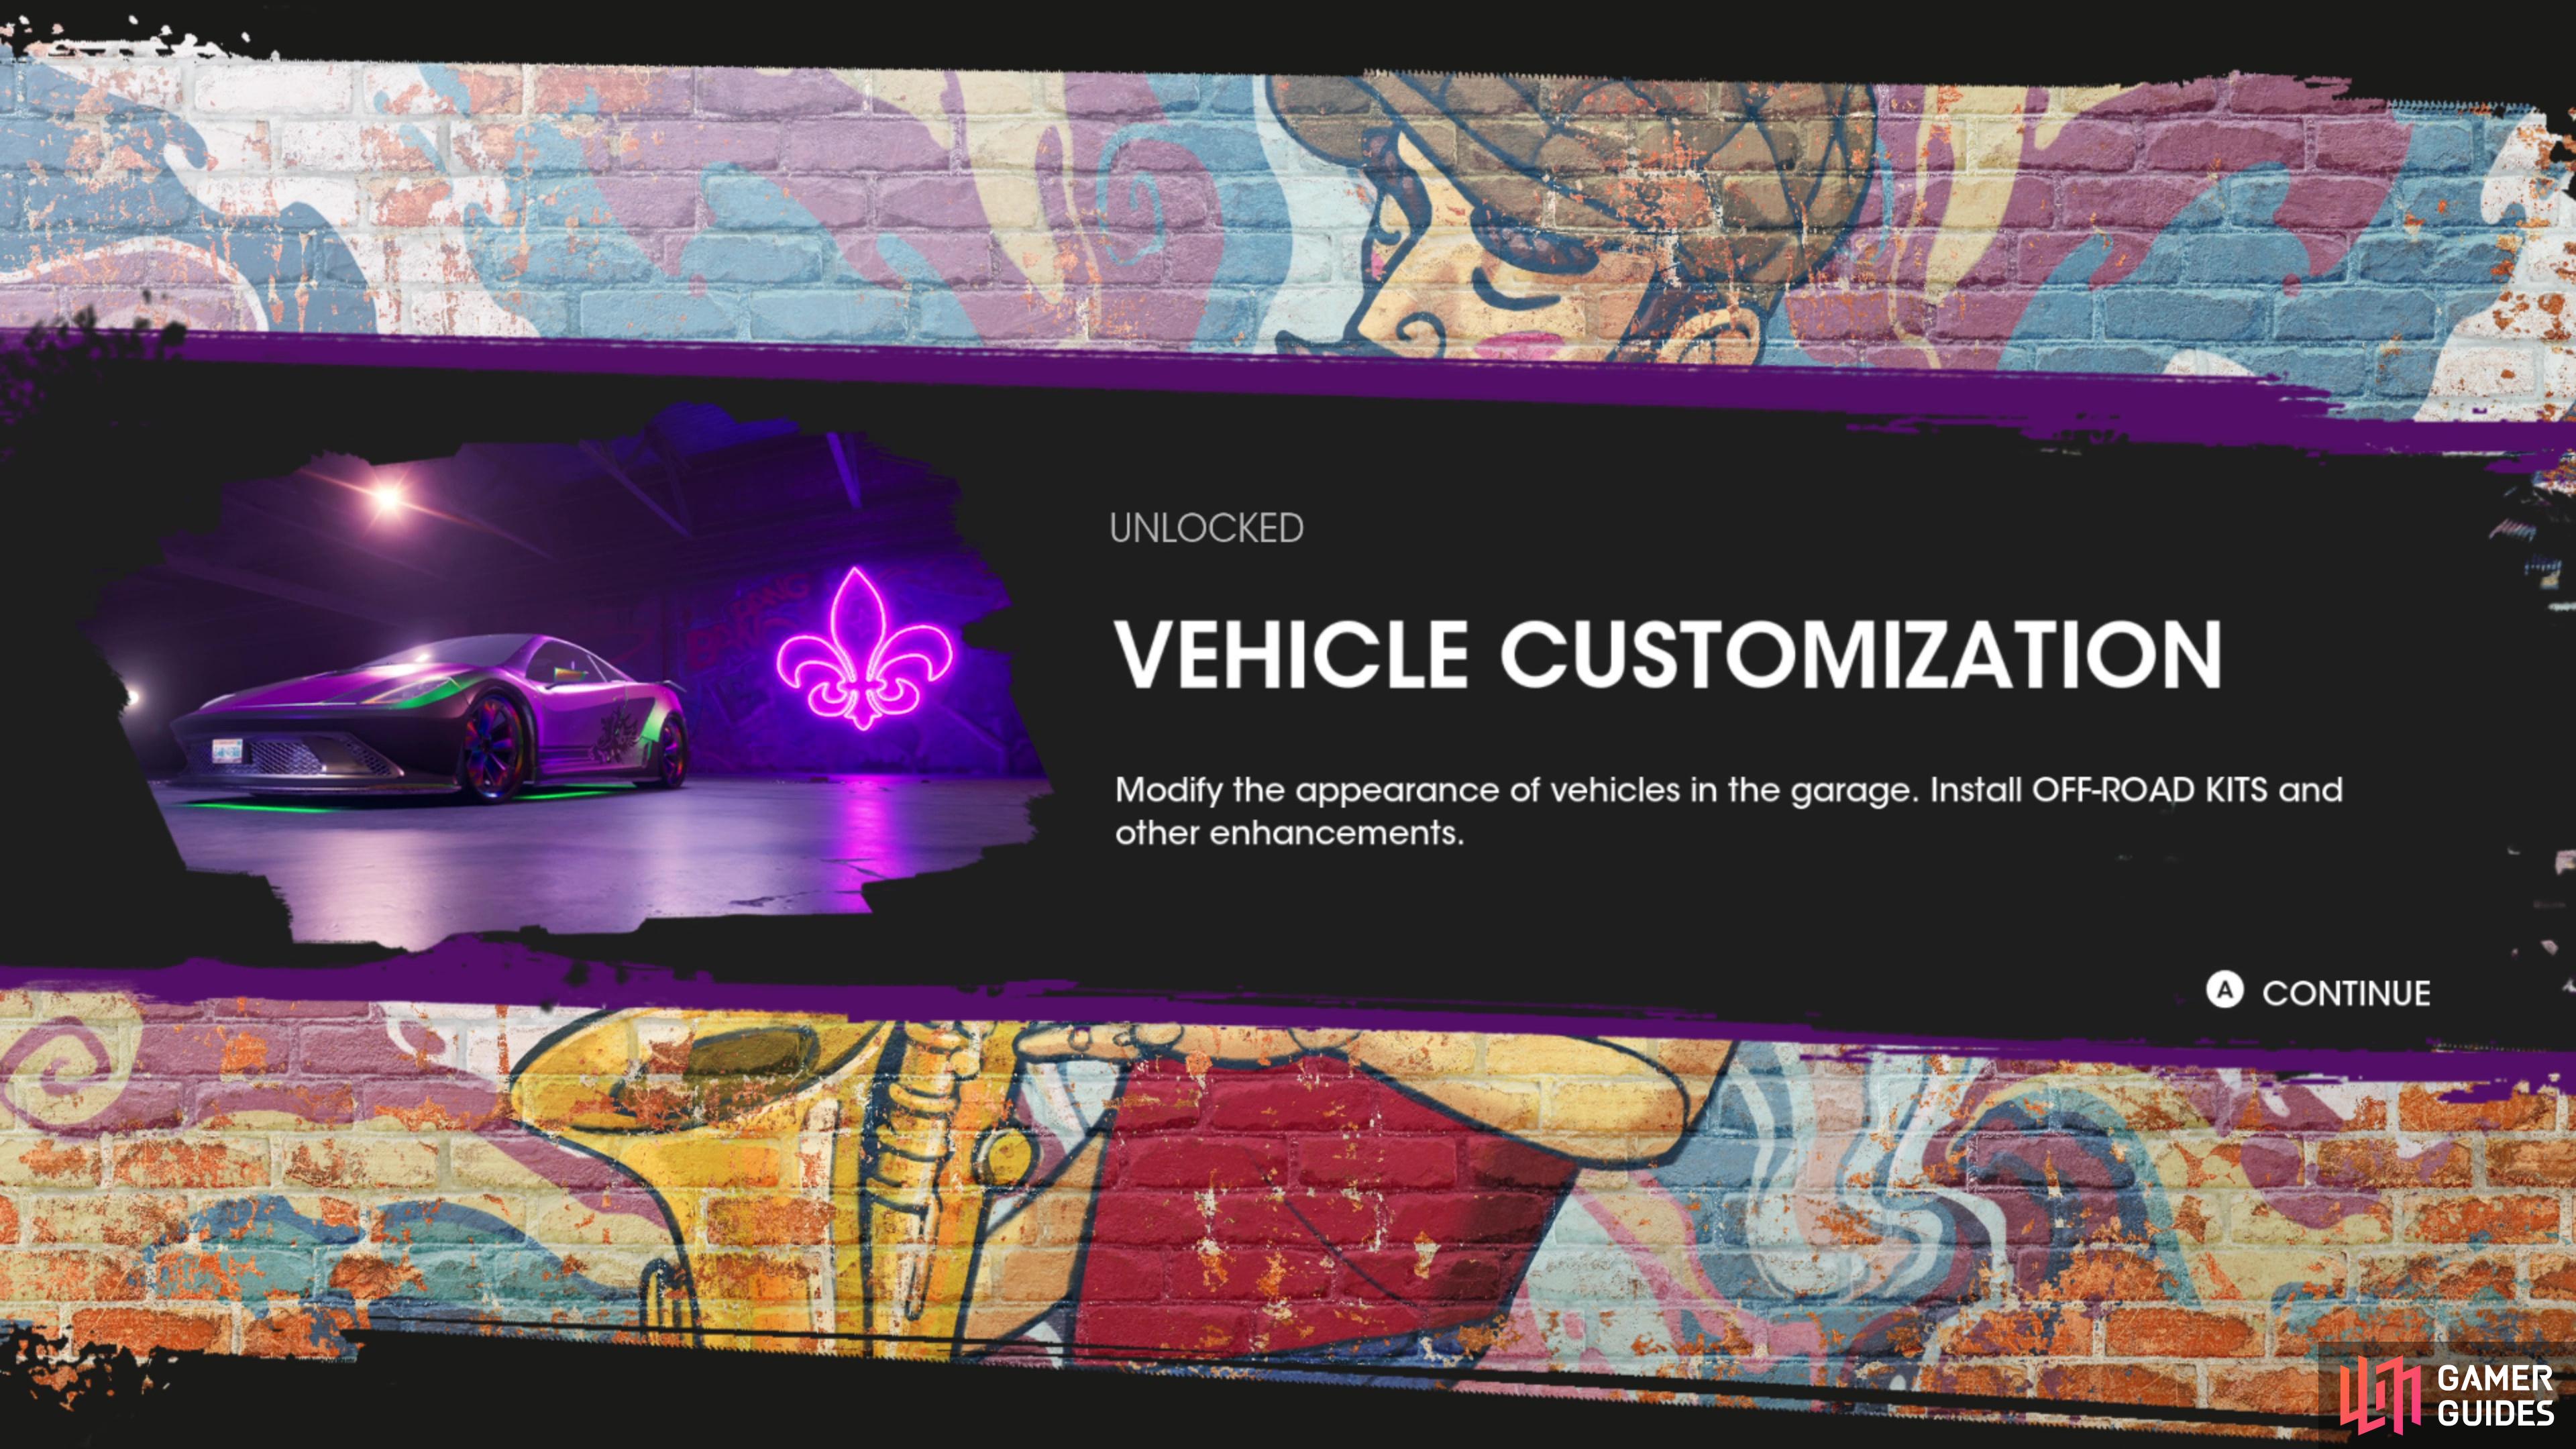 You’ll unlock vehicle customization by completing the mission “A Piece of the Action”.